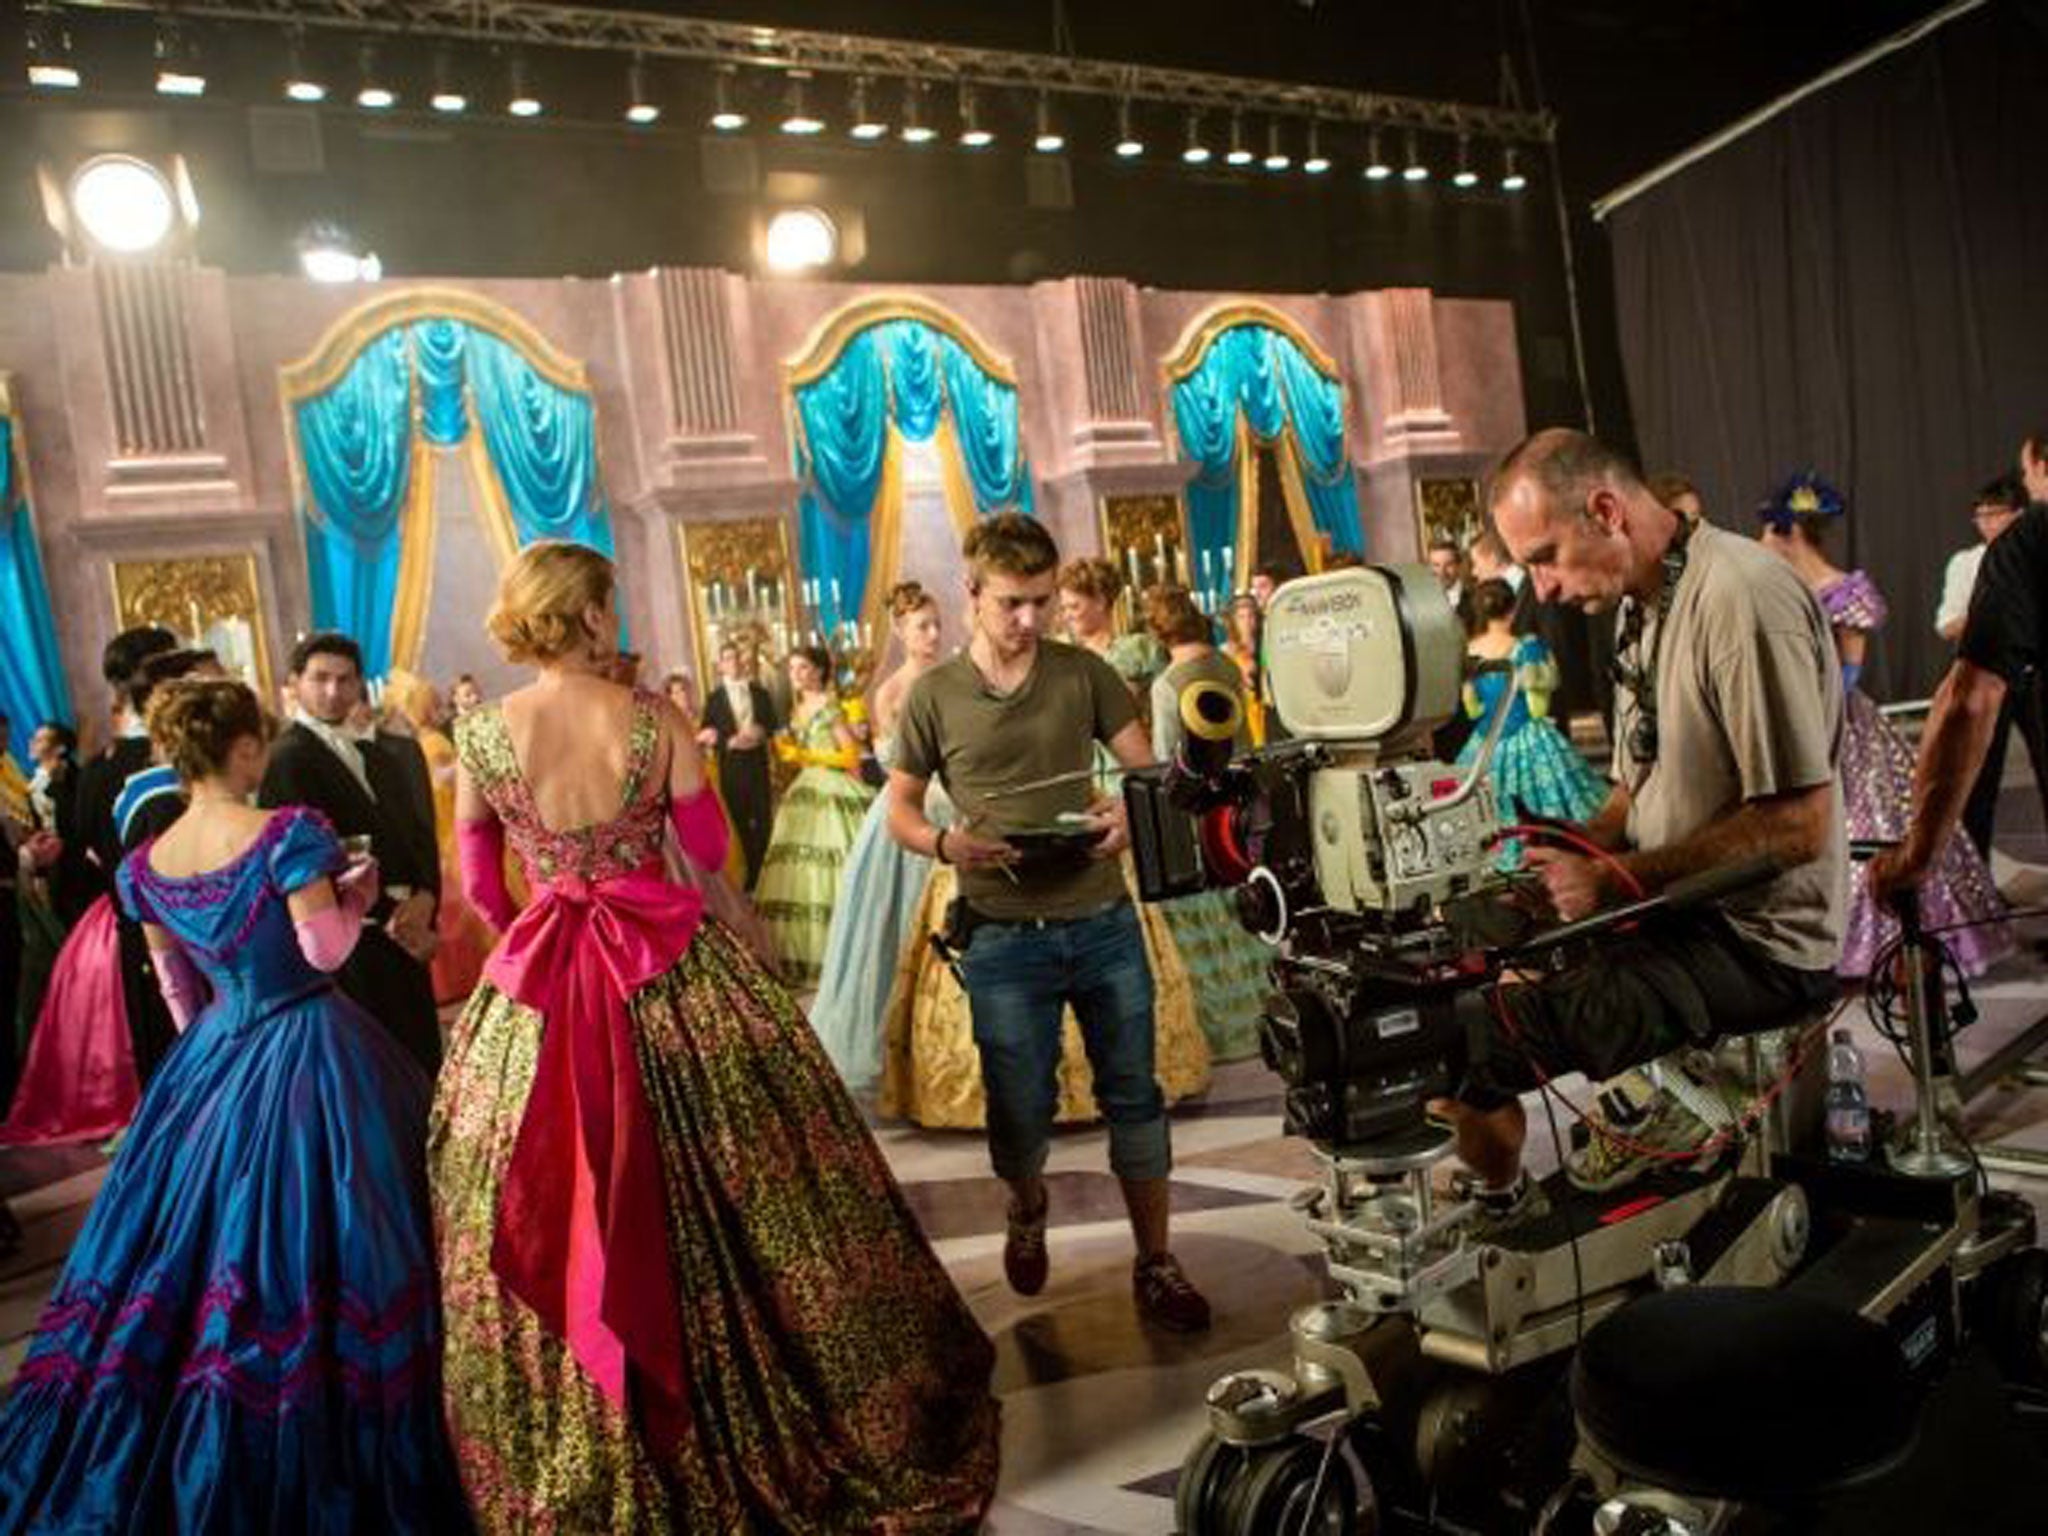 Over 80 extras were used for the ballroom?scene